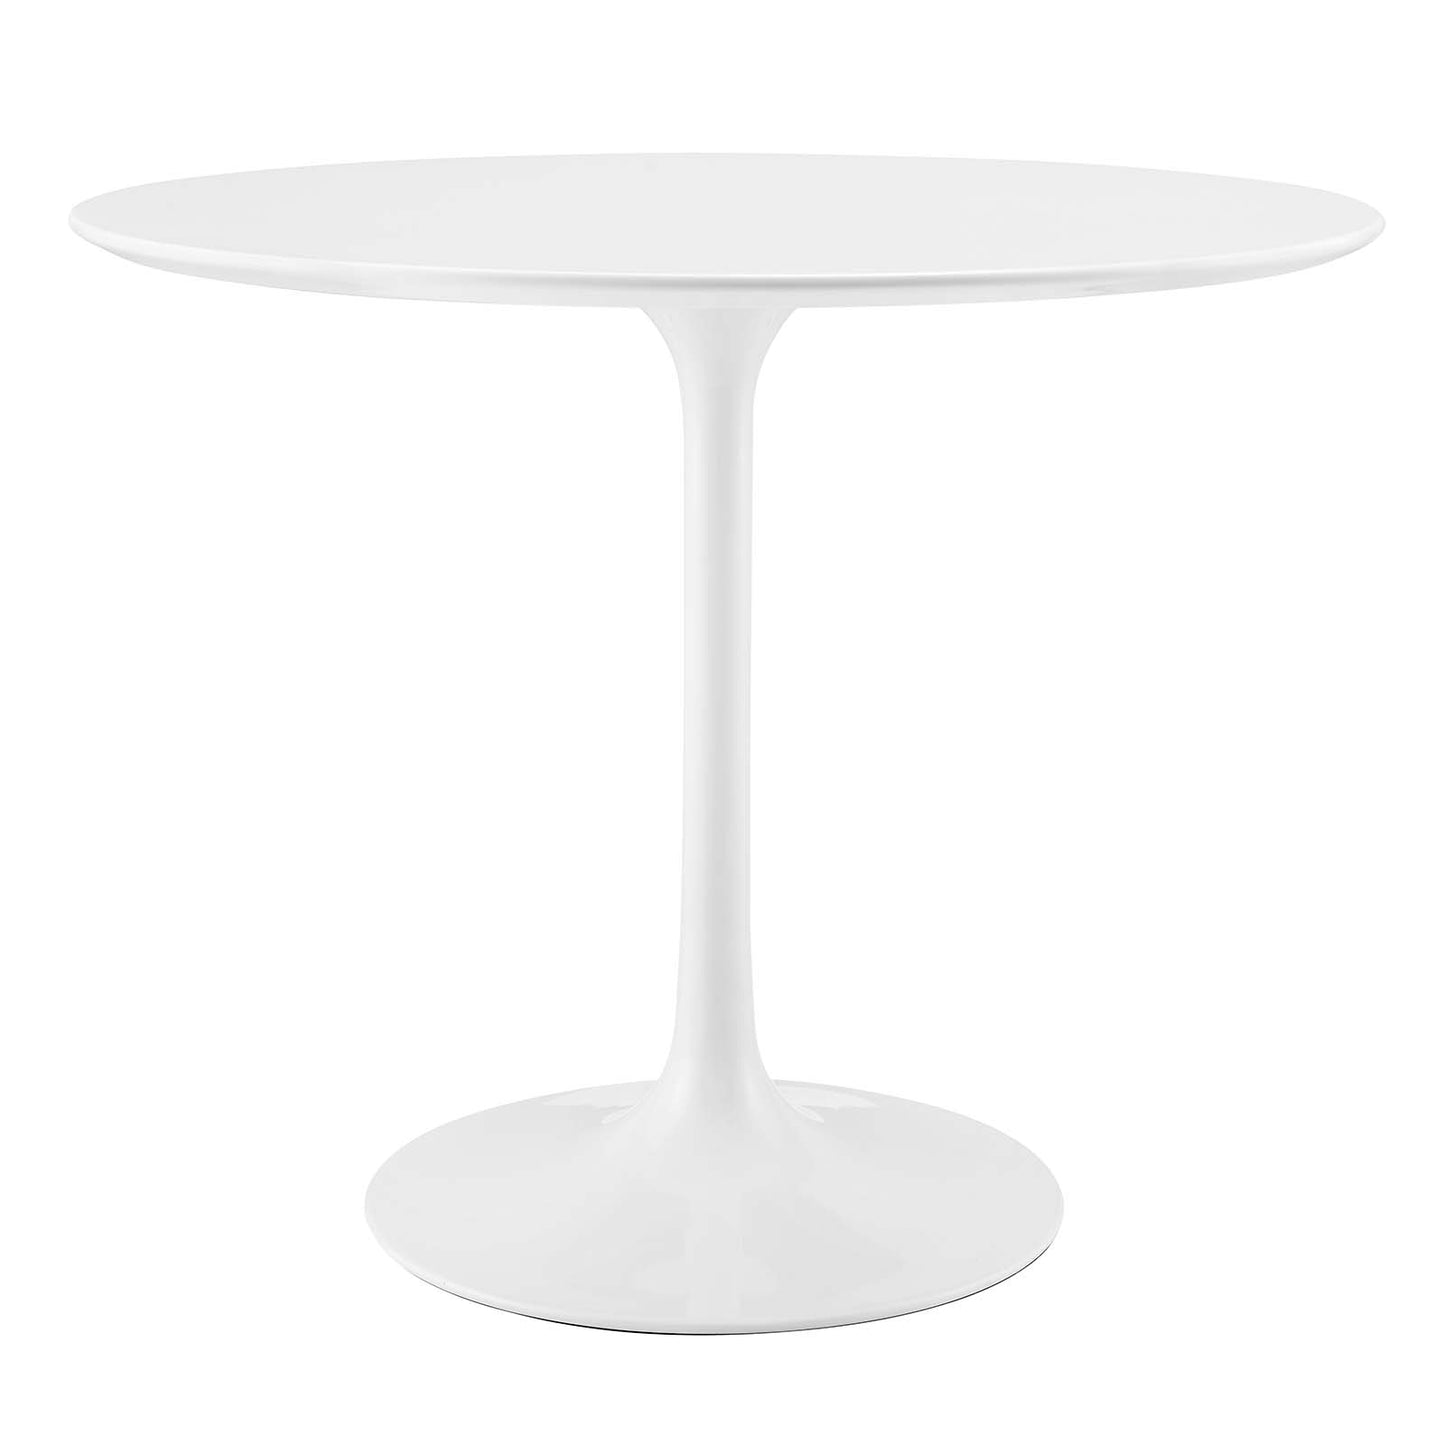 Modway Lippa 36" Round Wood Top Dining Table in White - EEI-1116